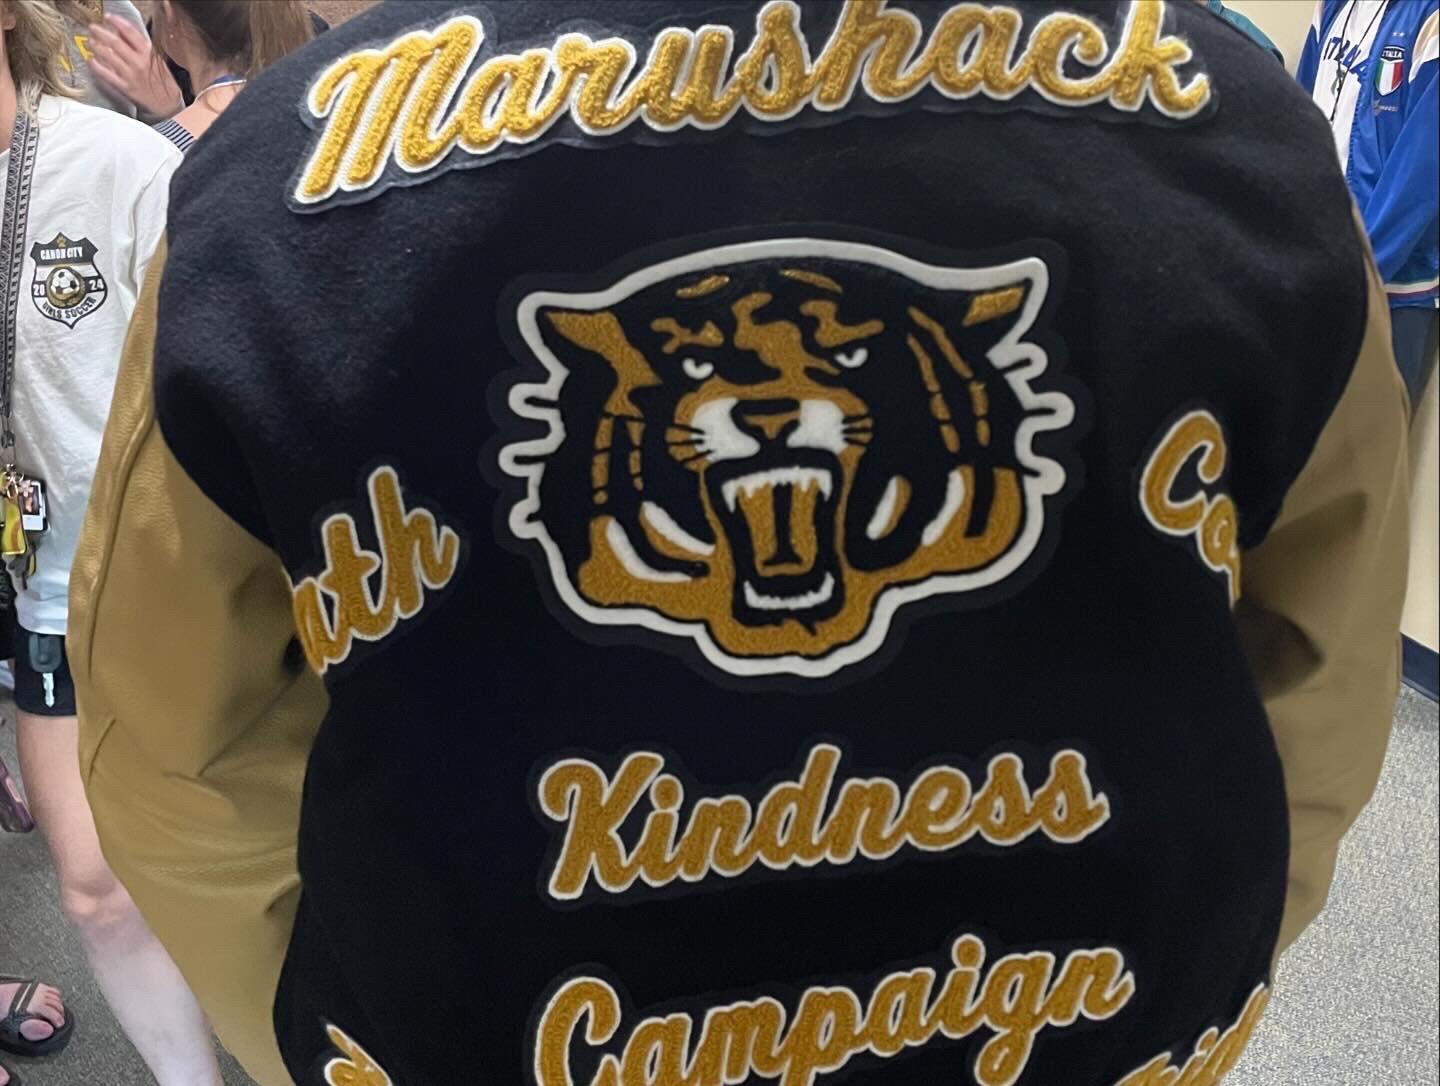 Back of Letter Jacket that says Marushack - Kindness Campaign